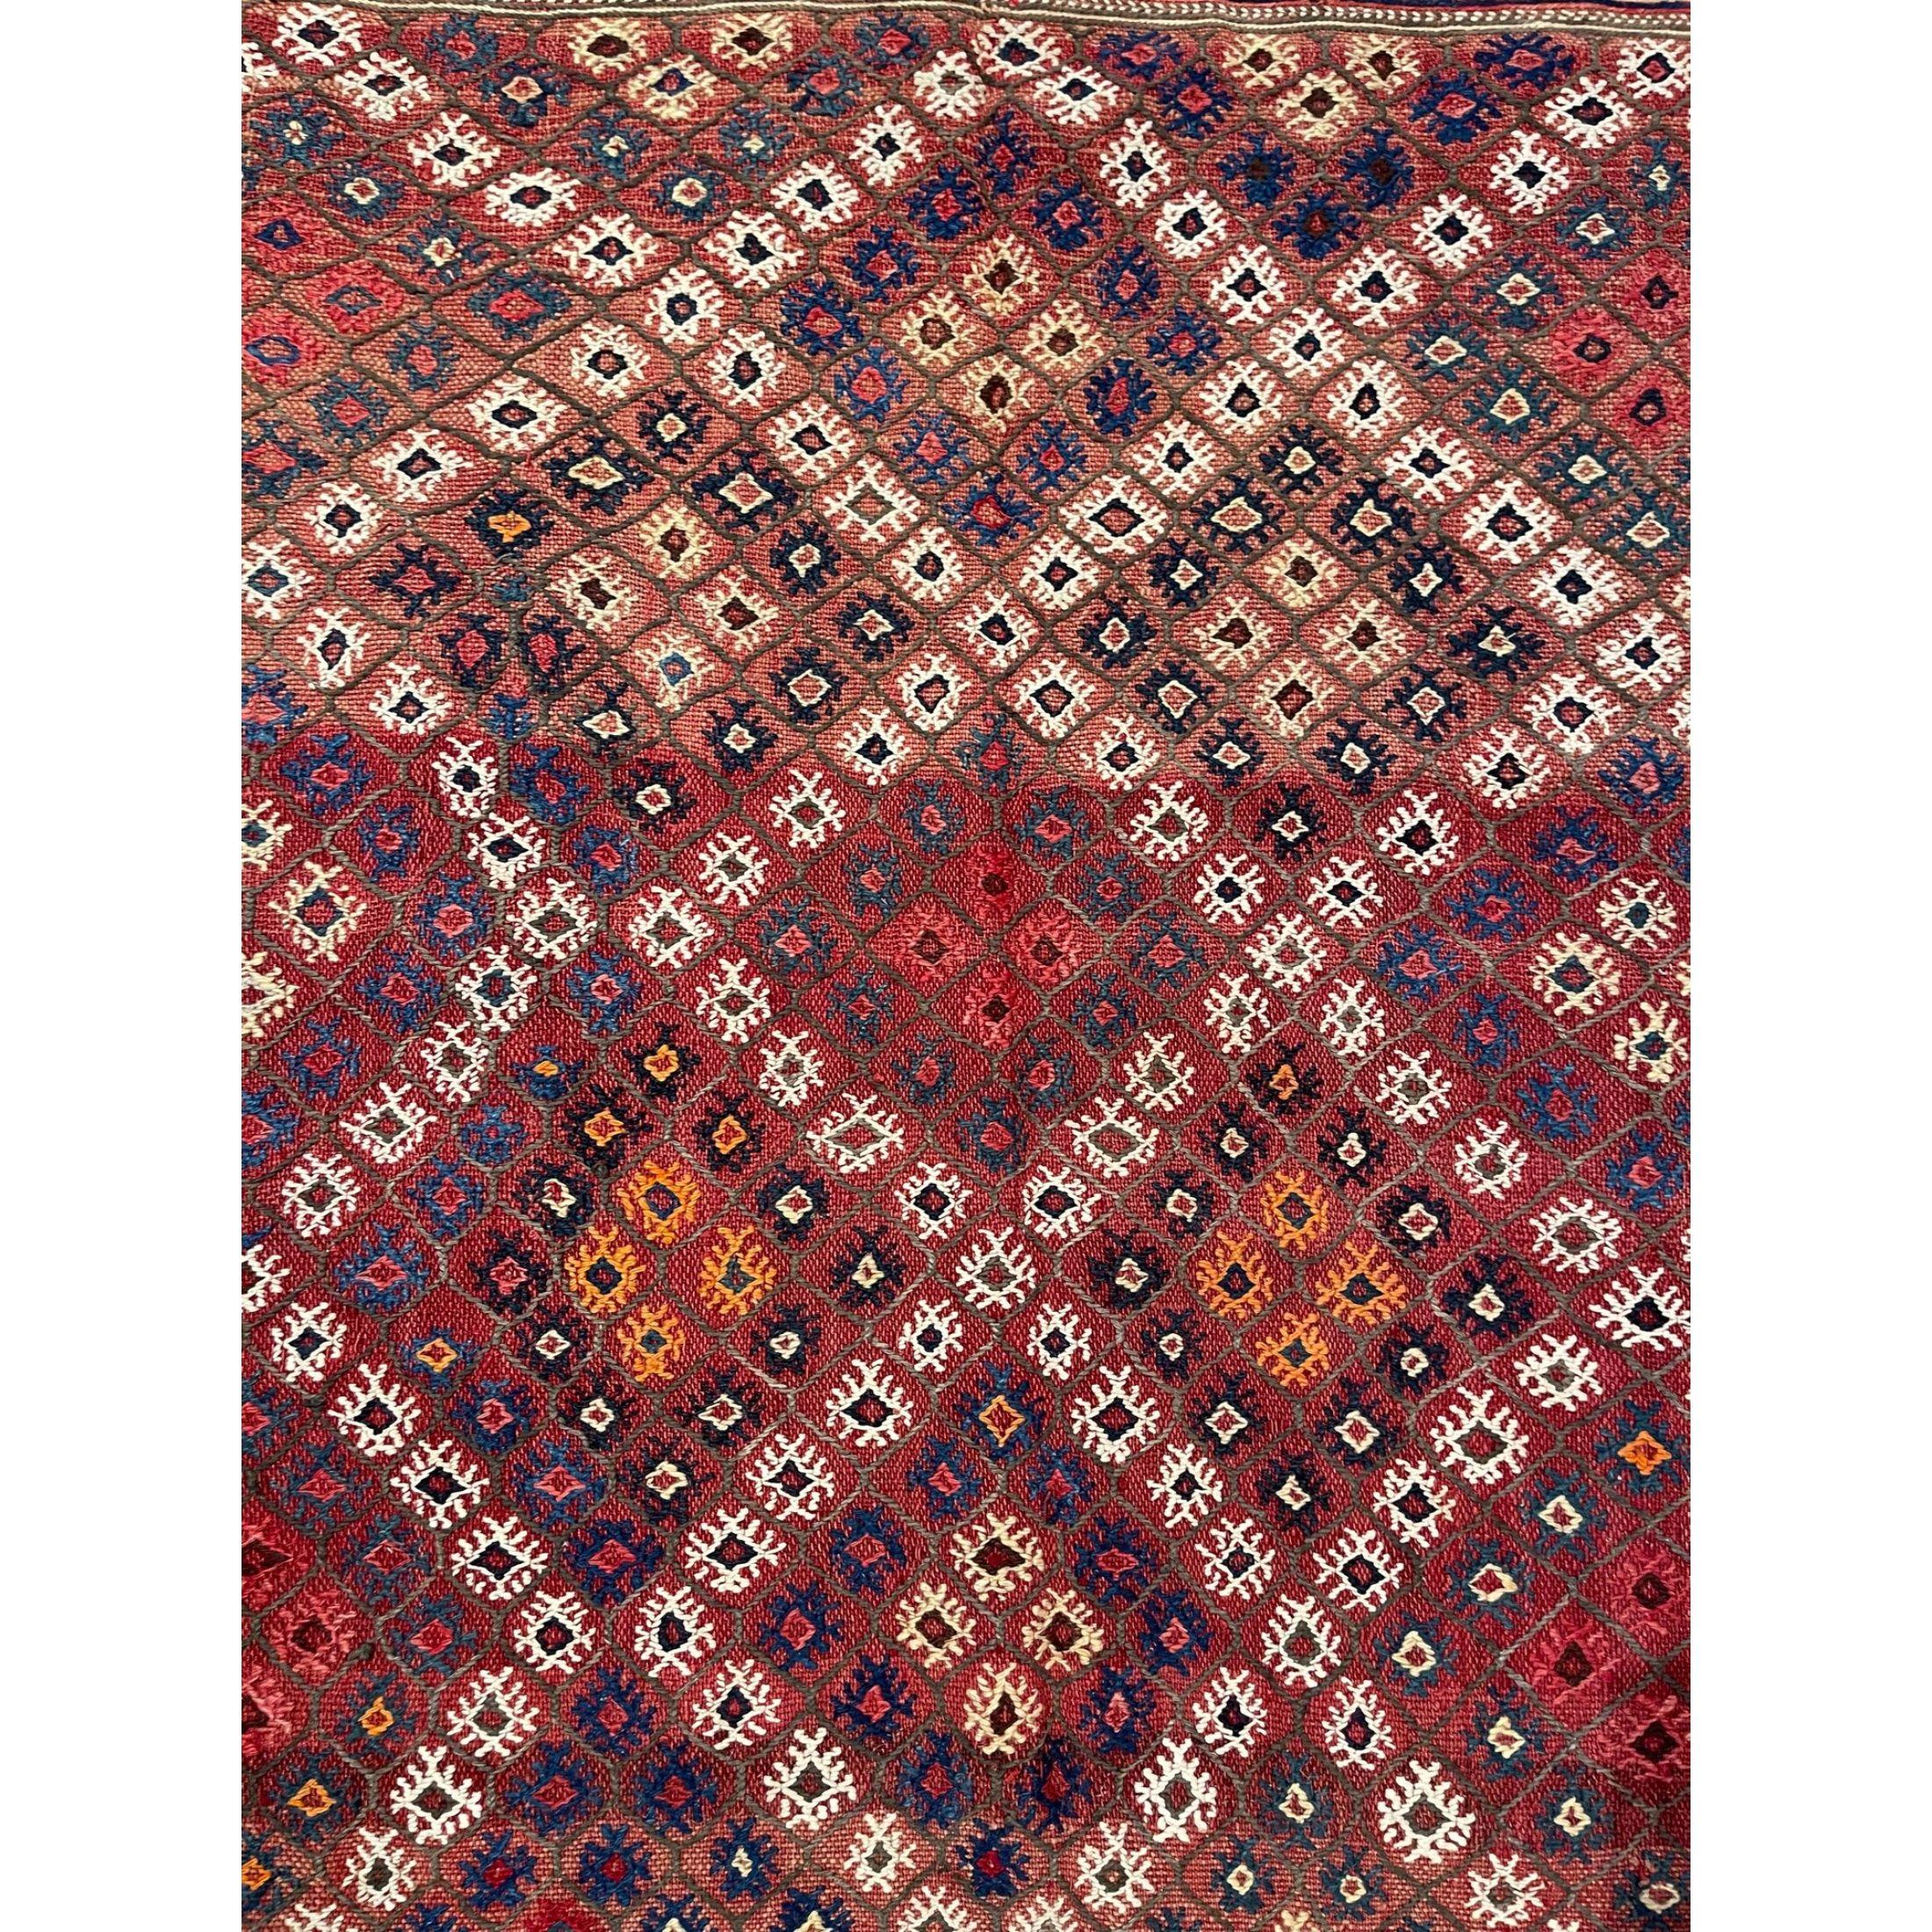 Antique Nomadic Rugs:

– To most people the concept of the area rug, especially the pile rug, is virtually synonymous with the Orient, above all Persia and Turkey. Flat woven floor coverings in plain weave or tapestry technique are to all intents